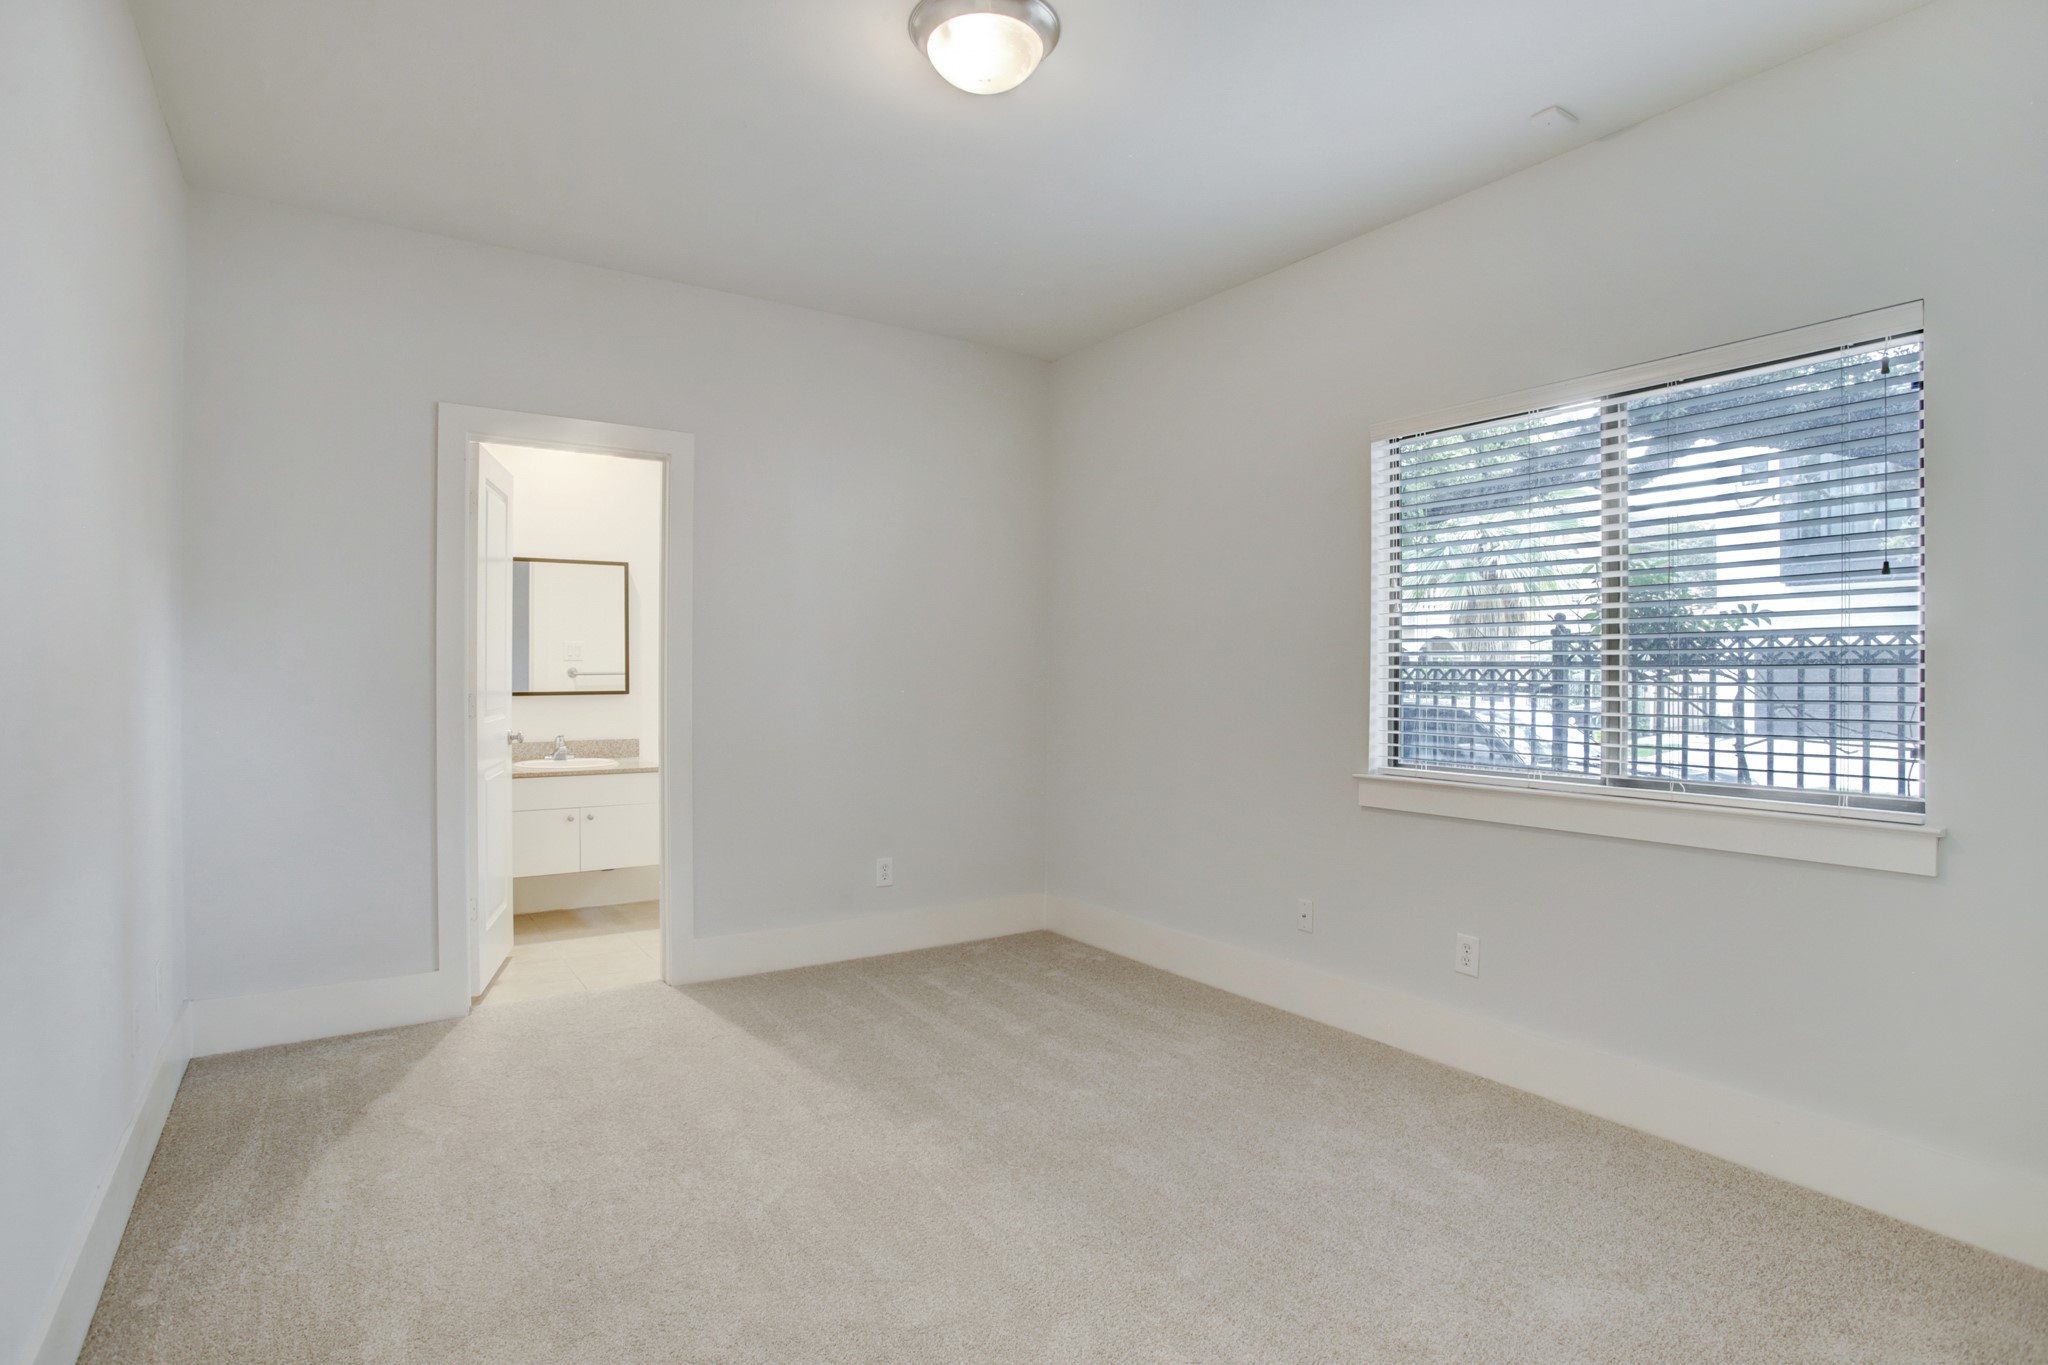 Easy access first floor bedroom. All rooms have great light, and all bedrooms are ensuite